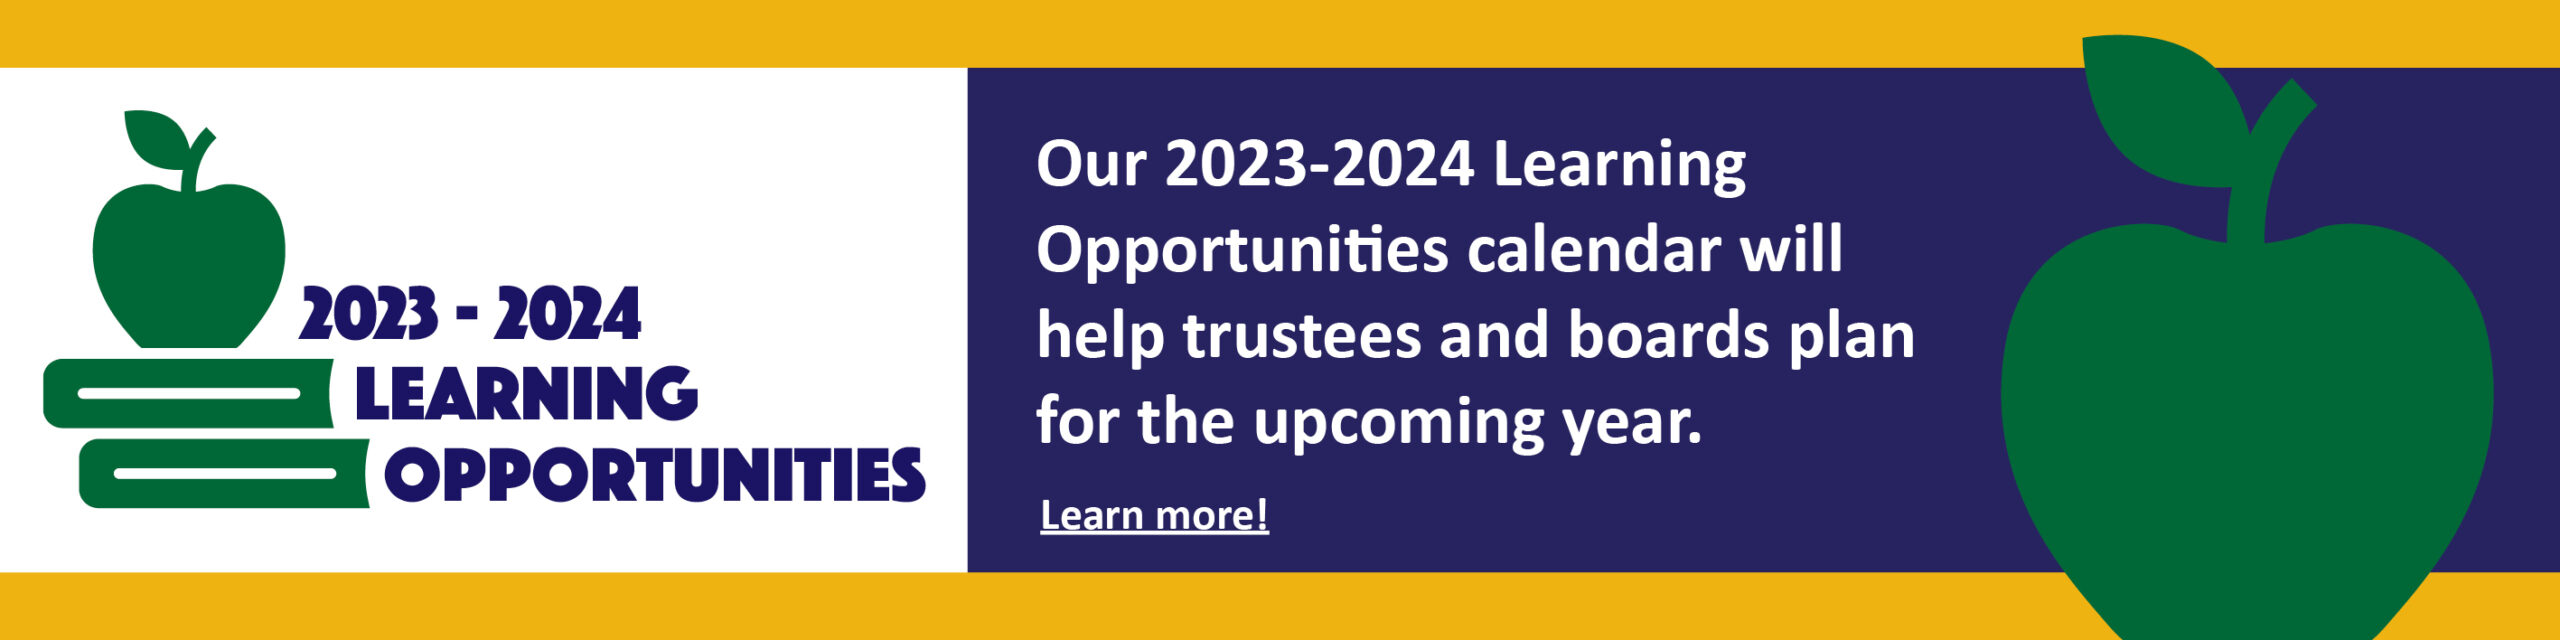 Image of an apple on top books. Text reads 2023-2024 Learning Opportunities Calendar. Our 2023-2024 Learning Opportunities calendar will help trustees and boards plan for the upcoming year. Learn more at https://www.mbschoolboards.ca/wp-content/uploads/2023/09/Learning-Opportunities-Calendar-2023_2024.pdf